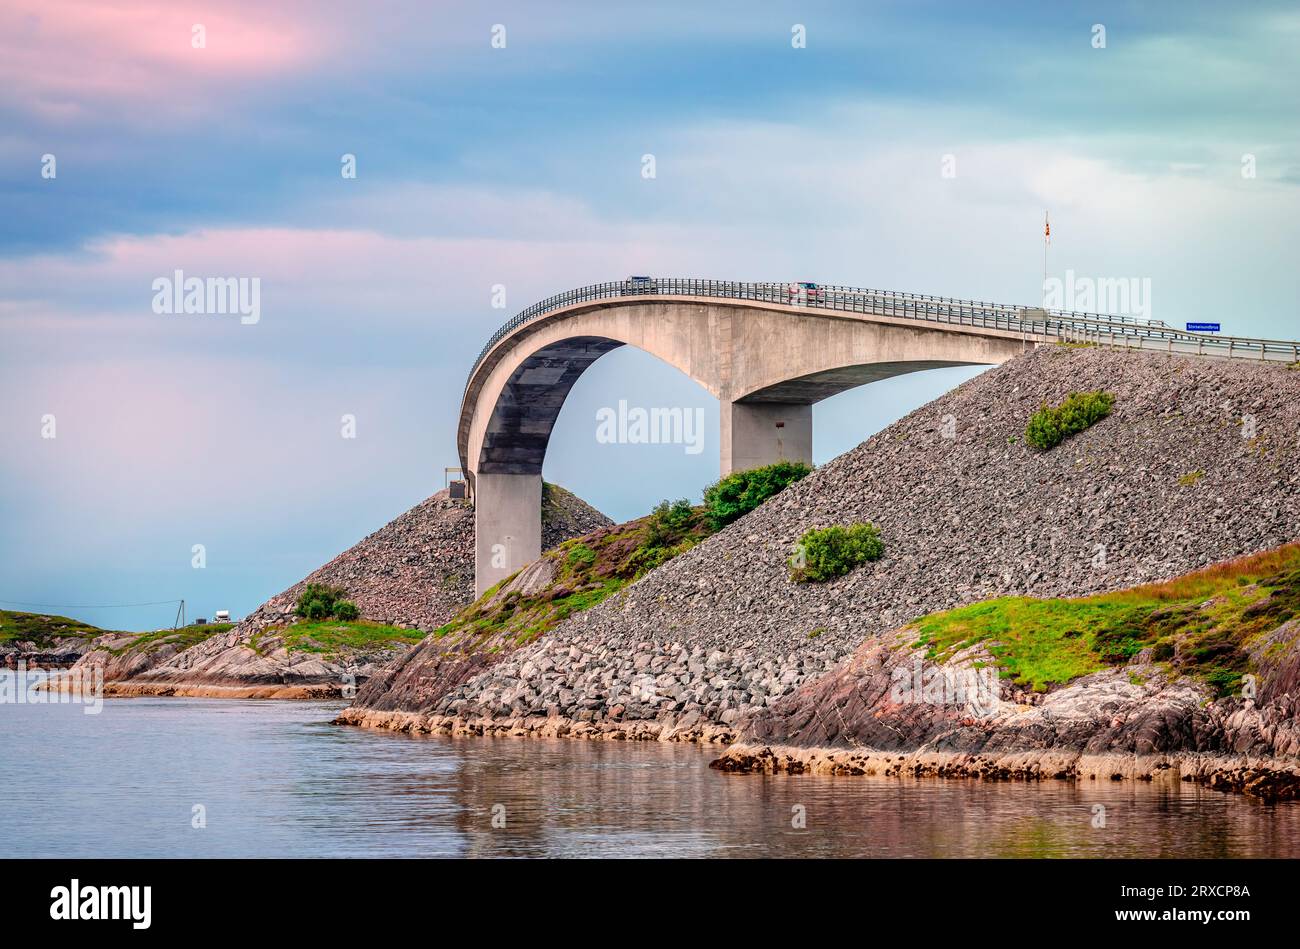 The iconic Storseisundet bridge, the longest of the eight bridges that make up the Atlantic Road in Western Norway Stock Photo